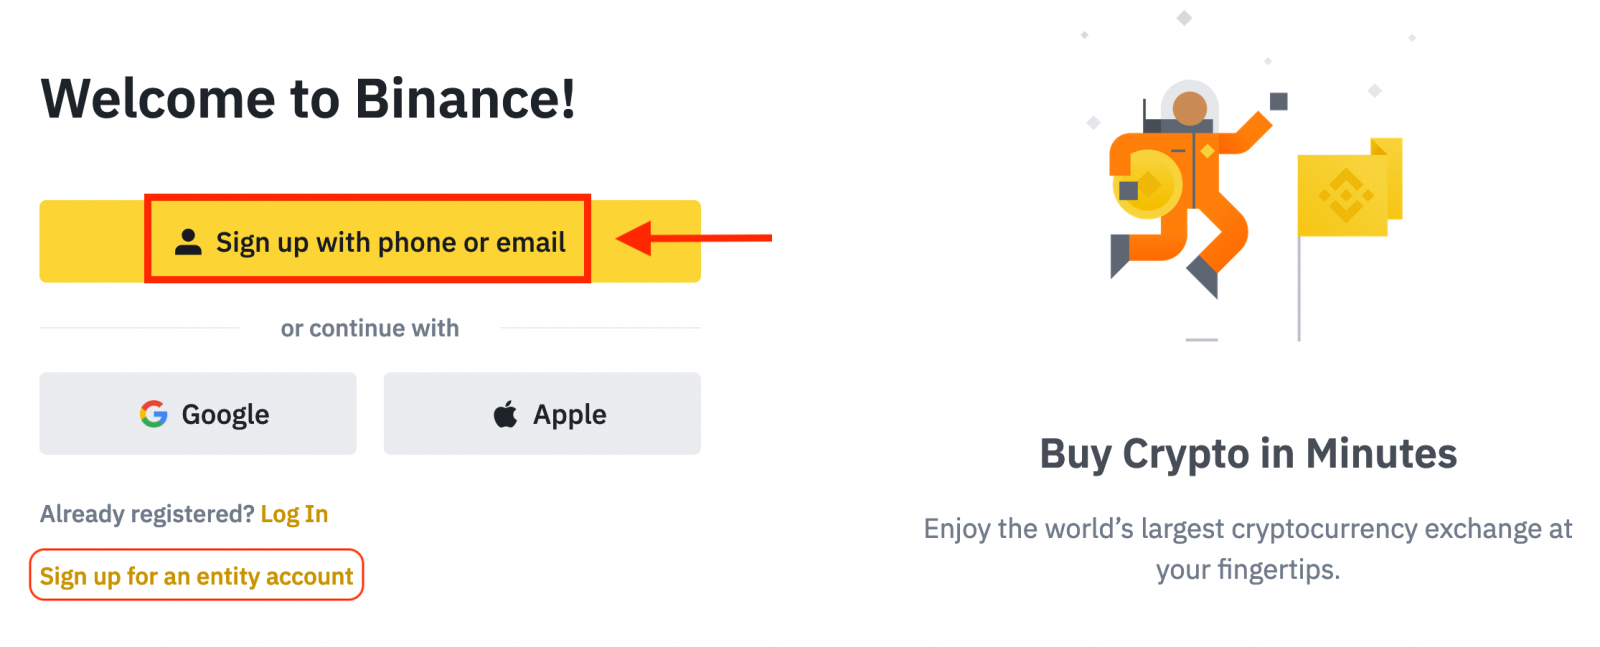 How to Open Account and Deposit into Binance